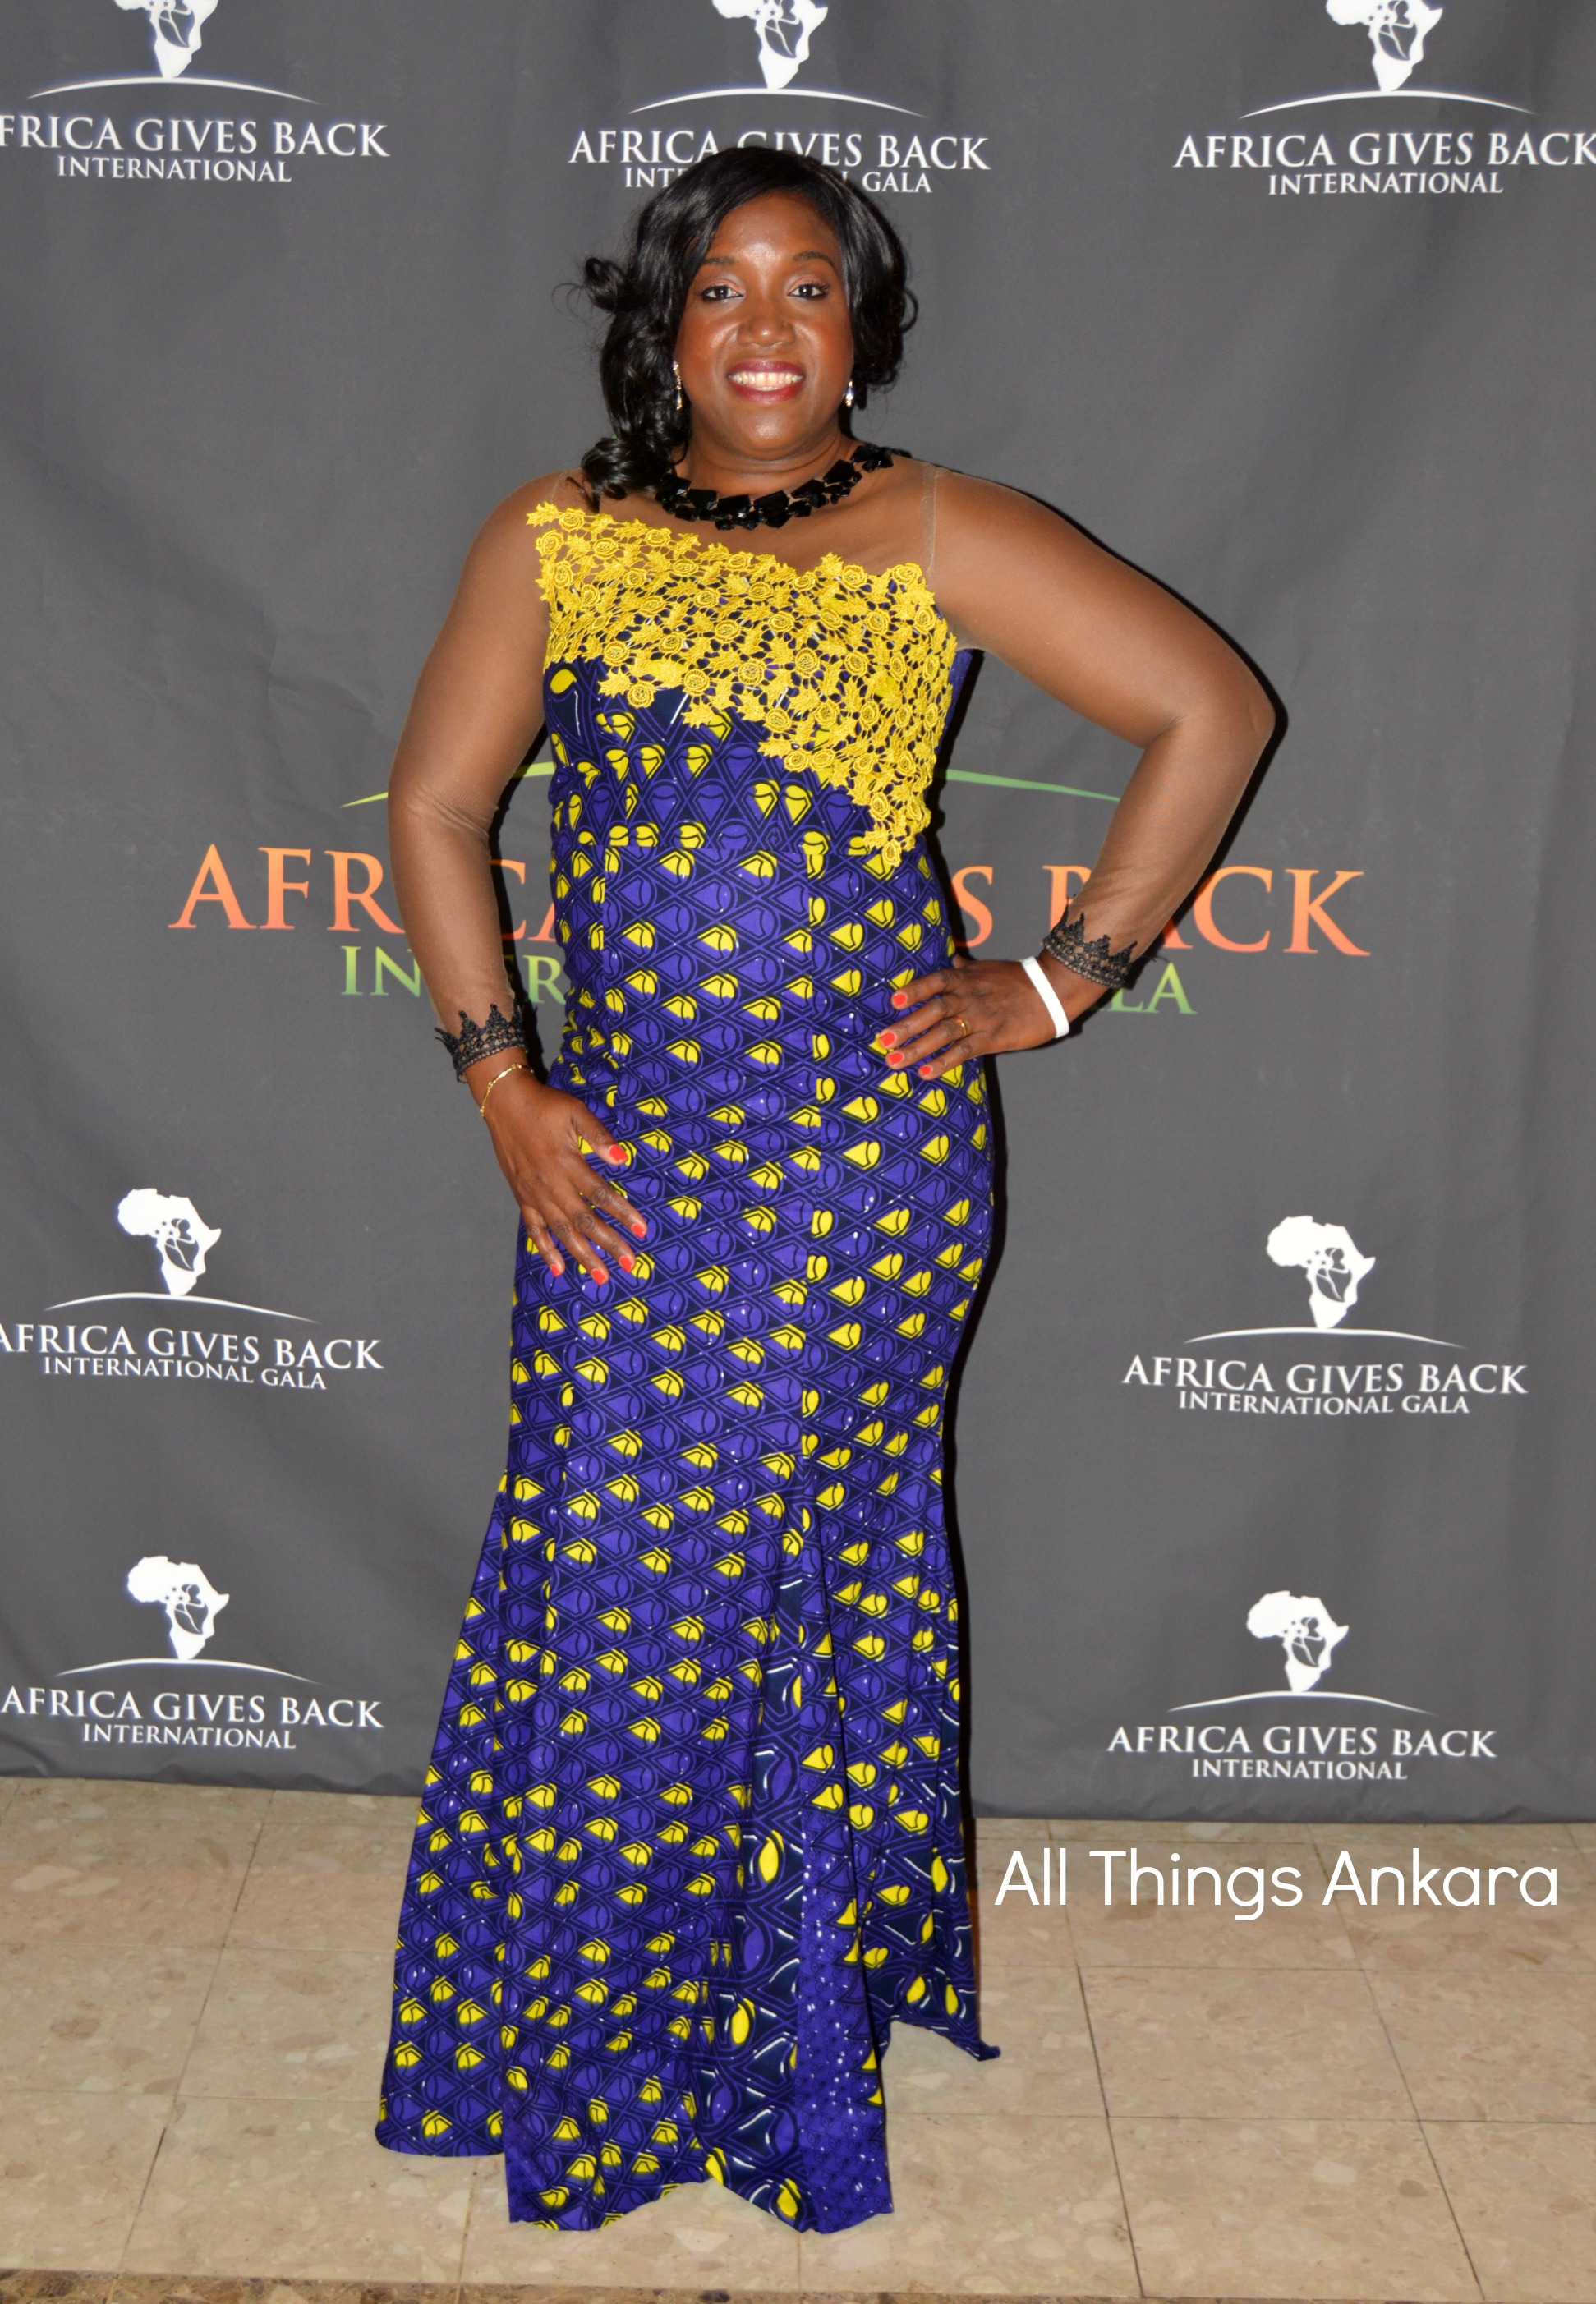 Gala-All Things Ankara's Best Dressed Women at Africa Gives Back International Gala 2016 3